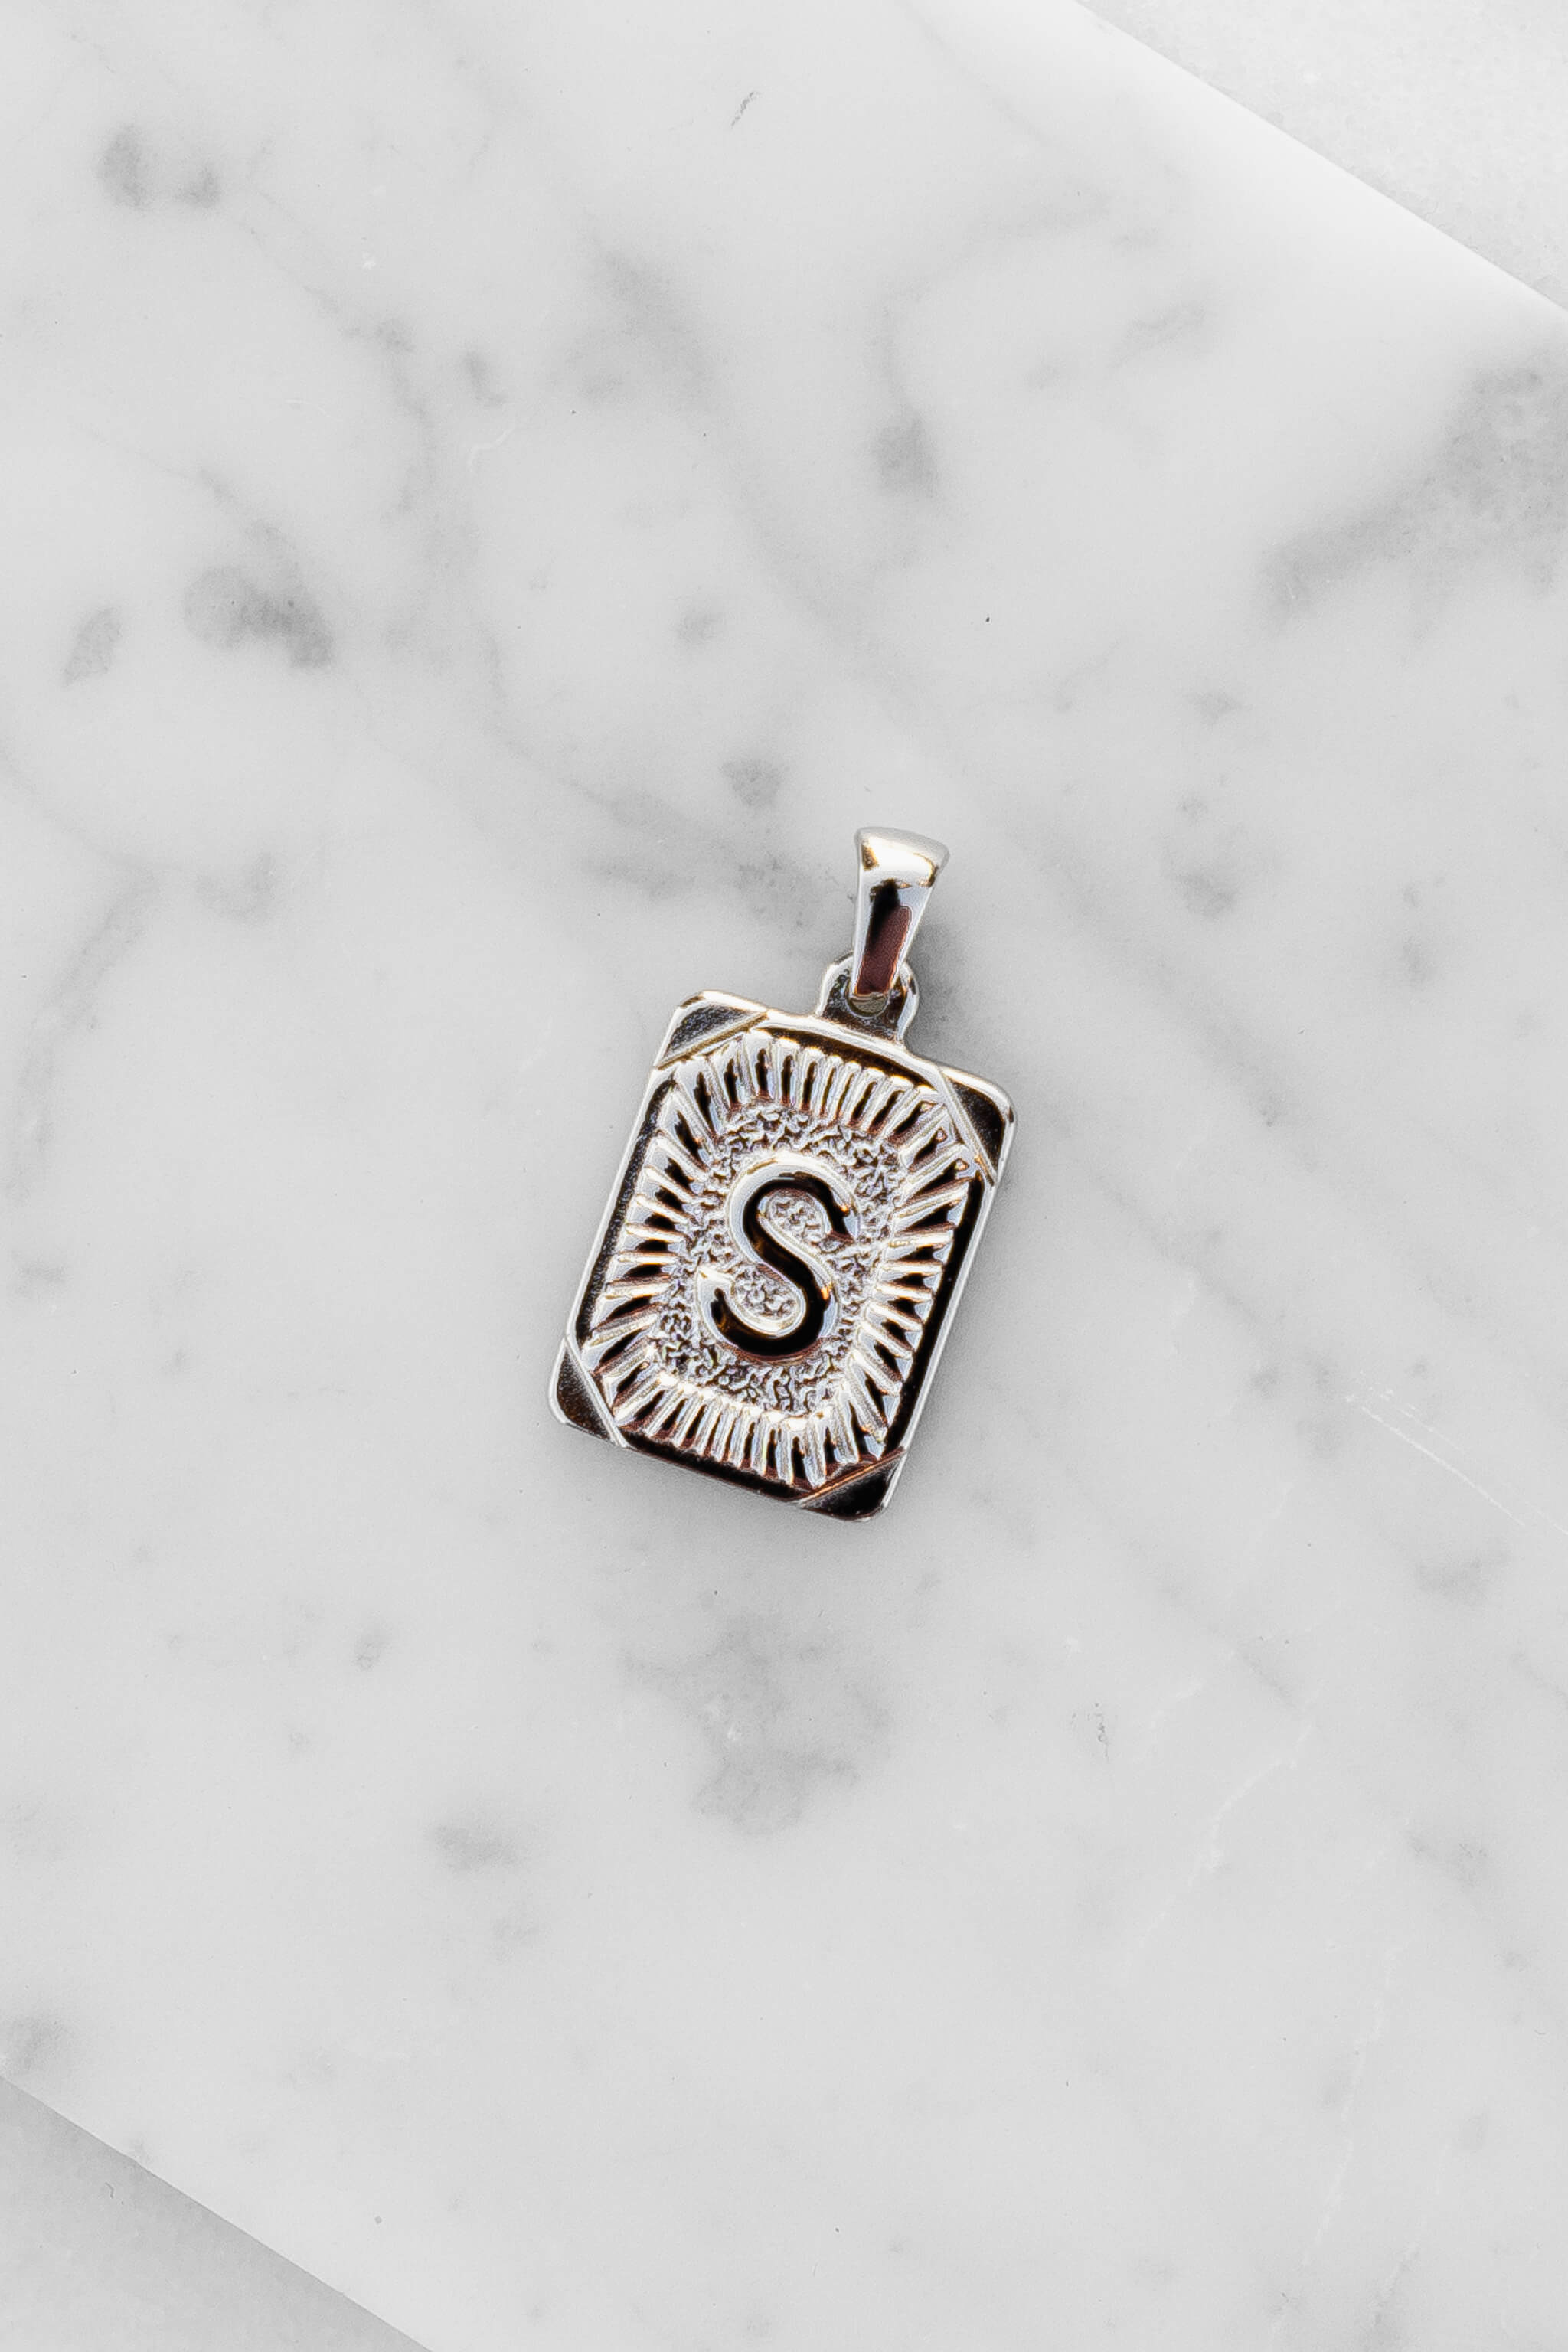 Silver Monogram Letter "S" Charm laying on a marble